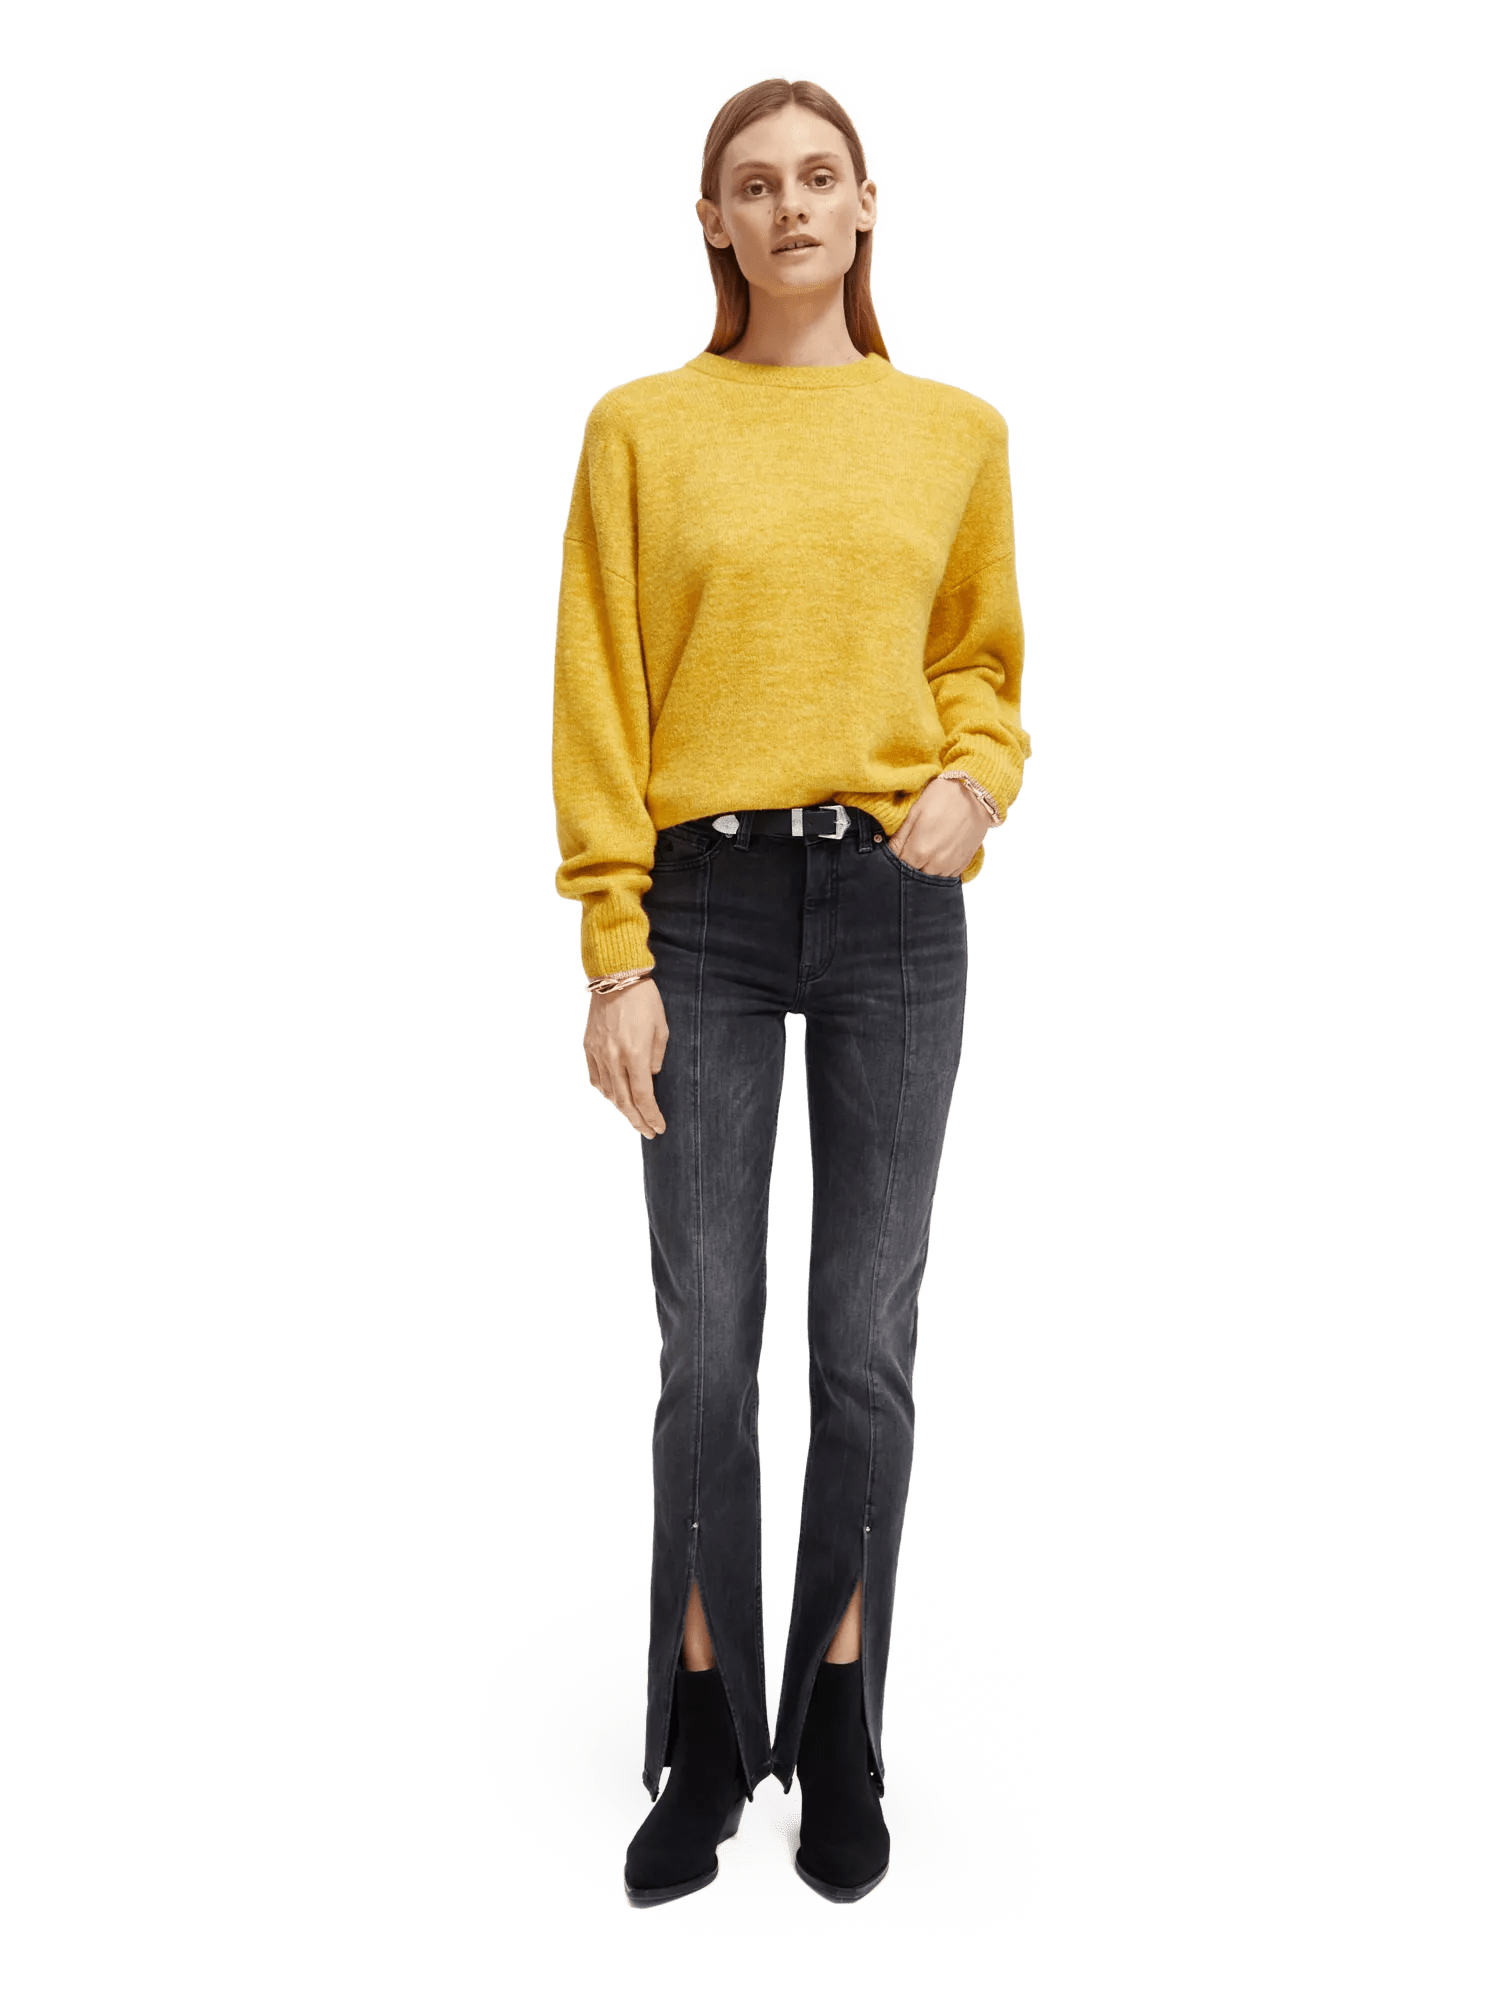 The Haut high-rise skinny jeans